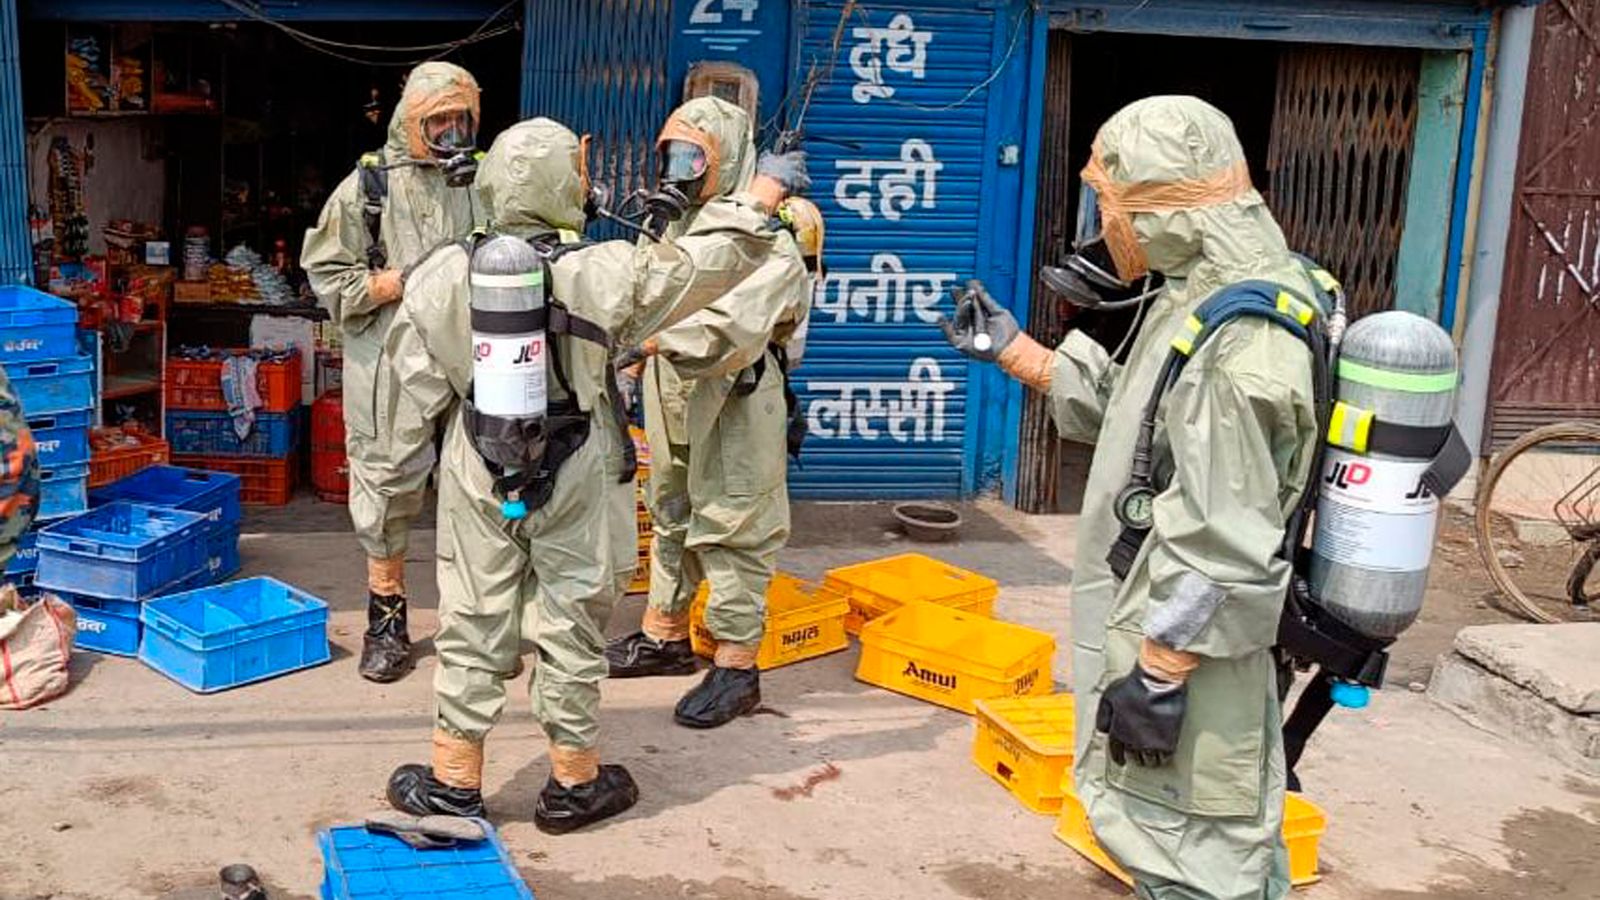 Leak of unknown gas kills 11 in India